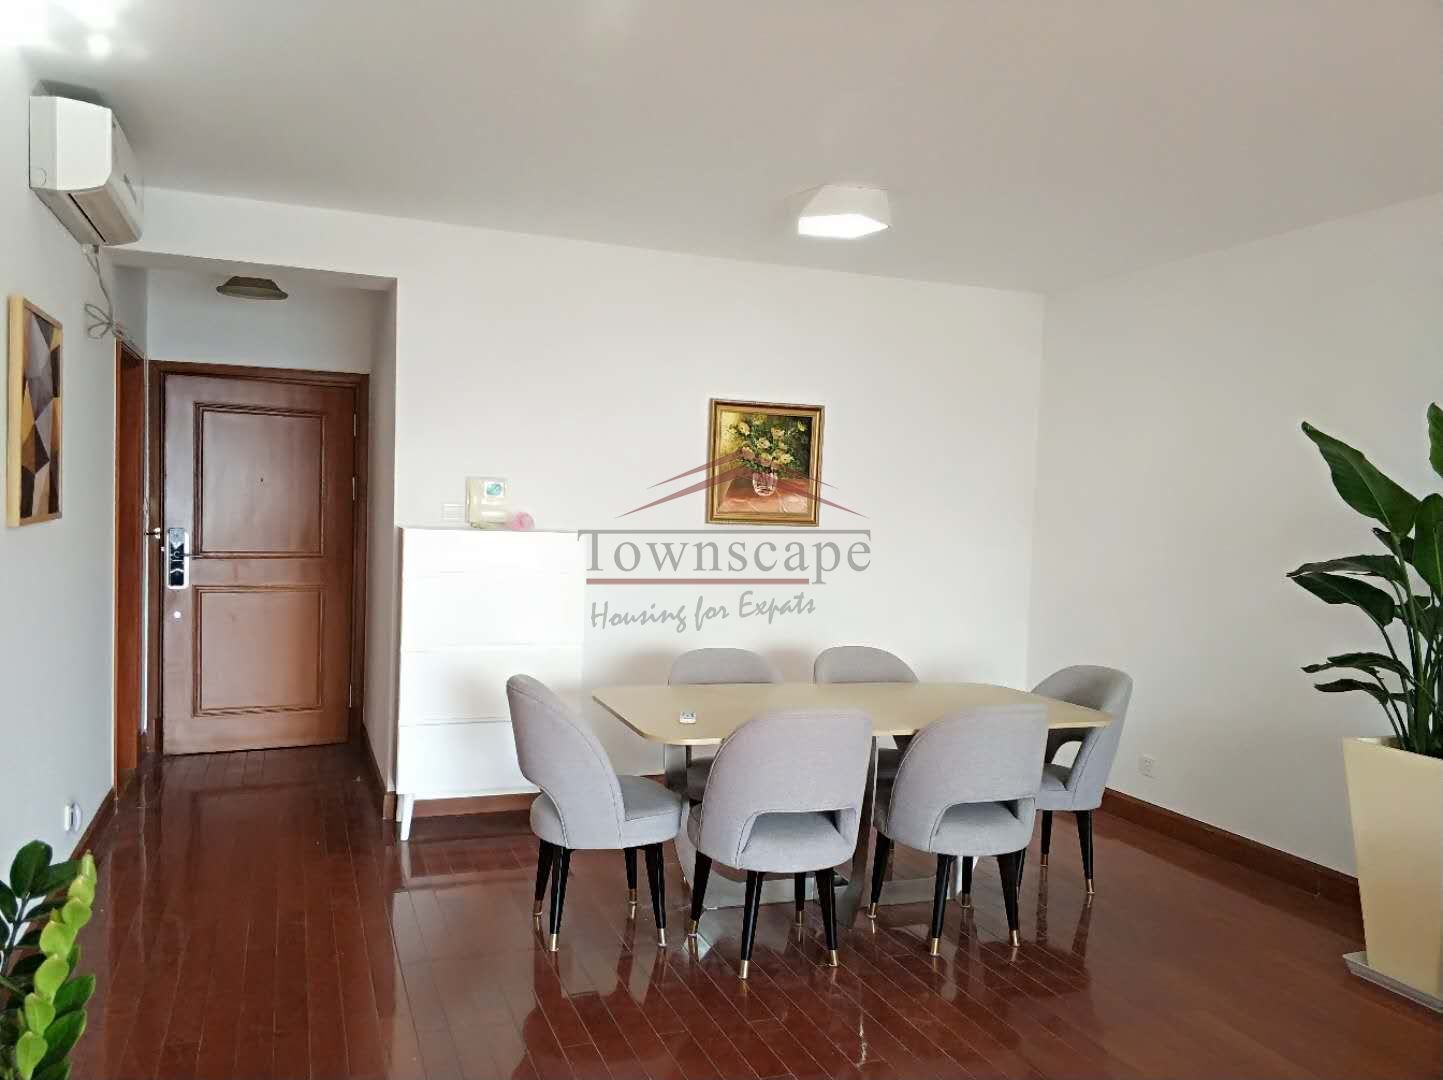  Modern 3BR Apartment for Rent in Anfu Road